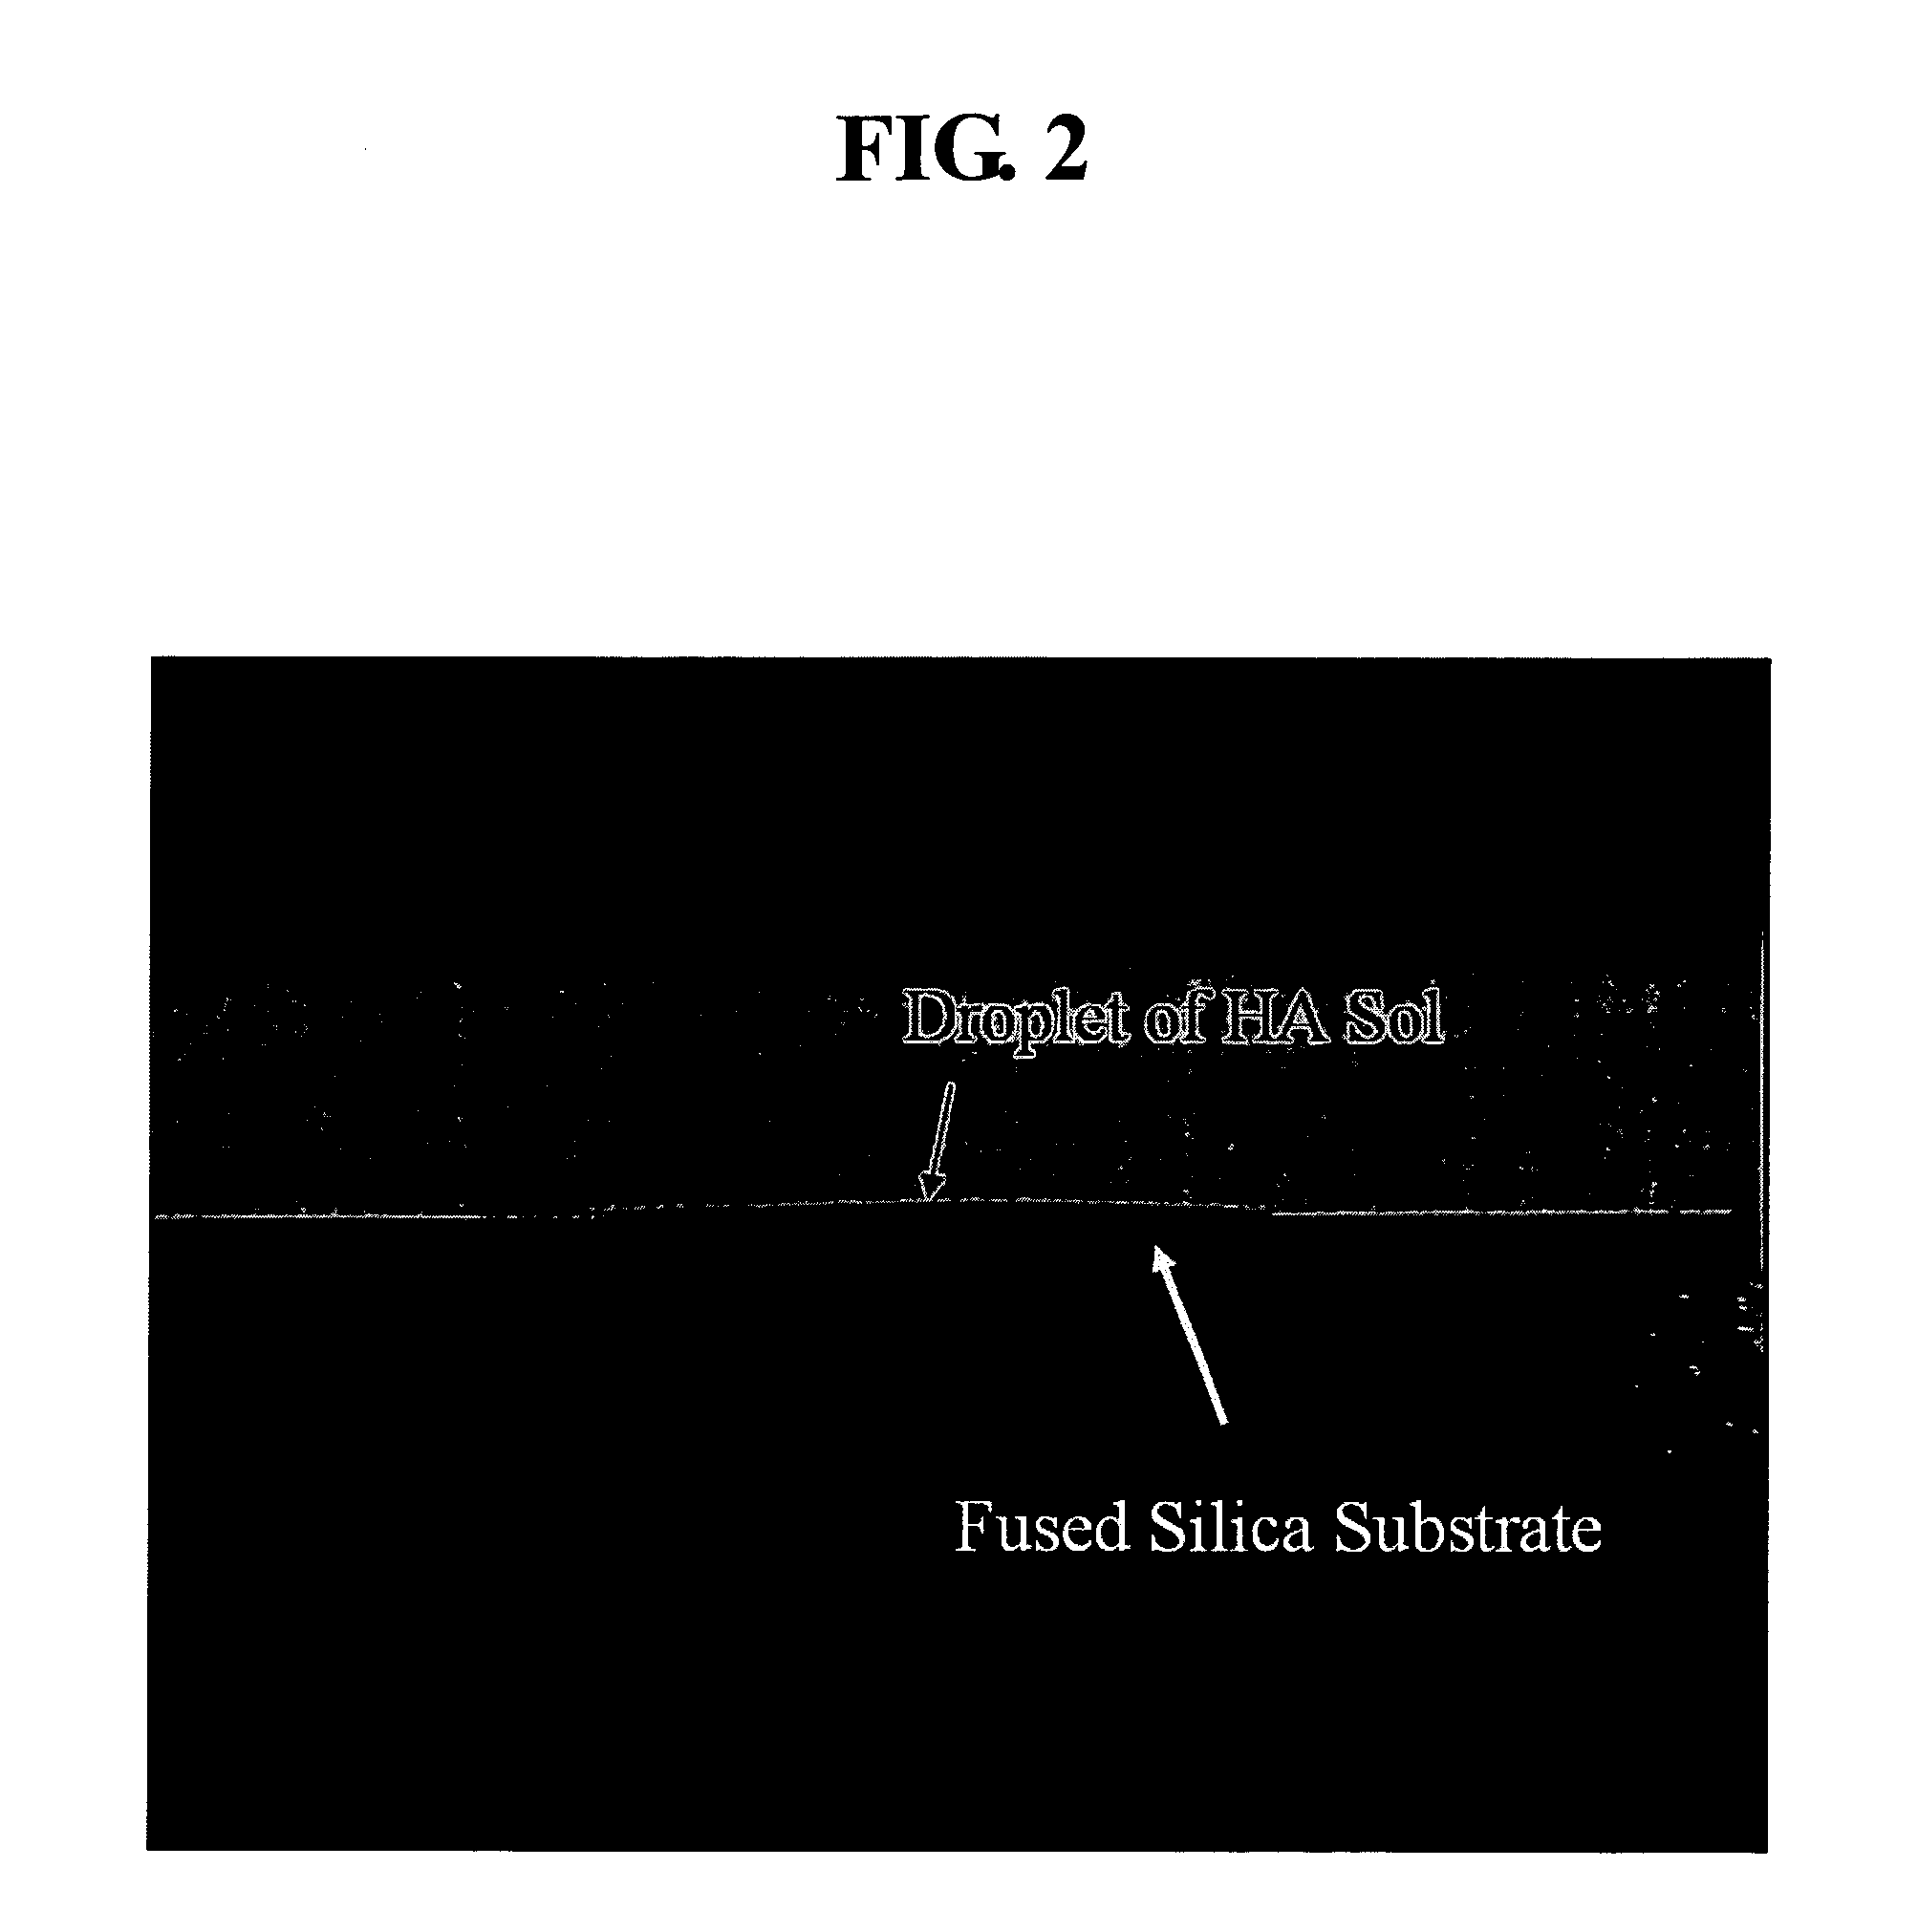 Method for producing polymeric sol of calcium phosphate compound and method for coating the same on a metal implant